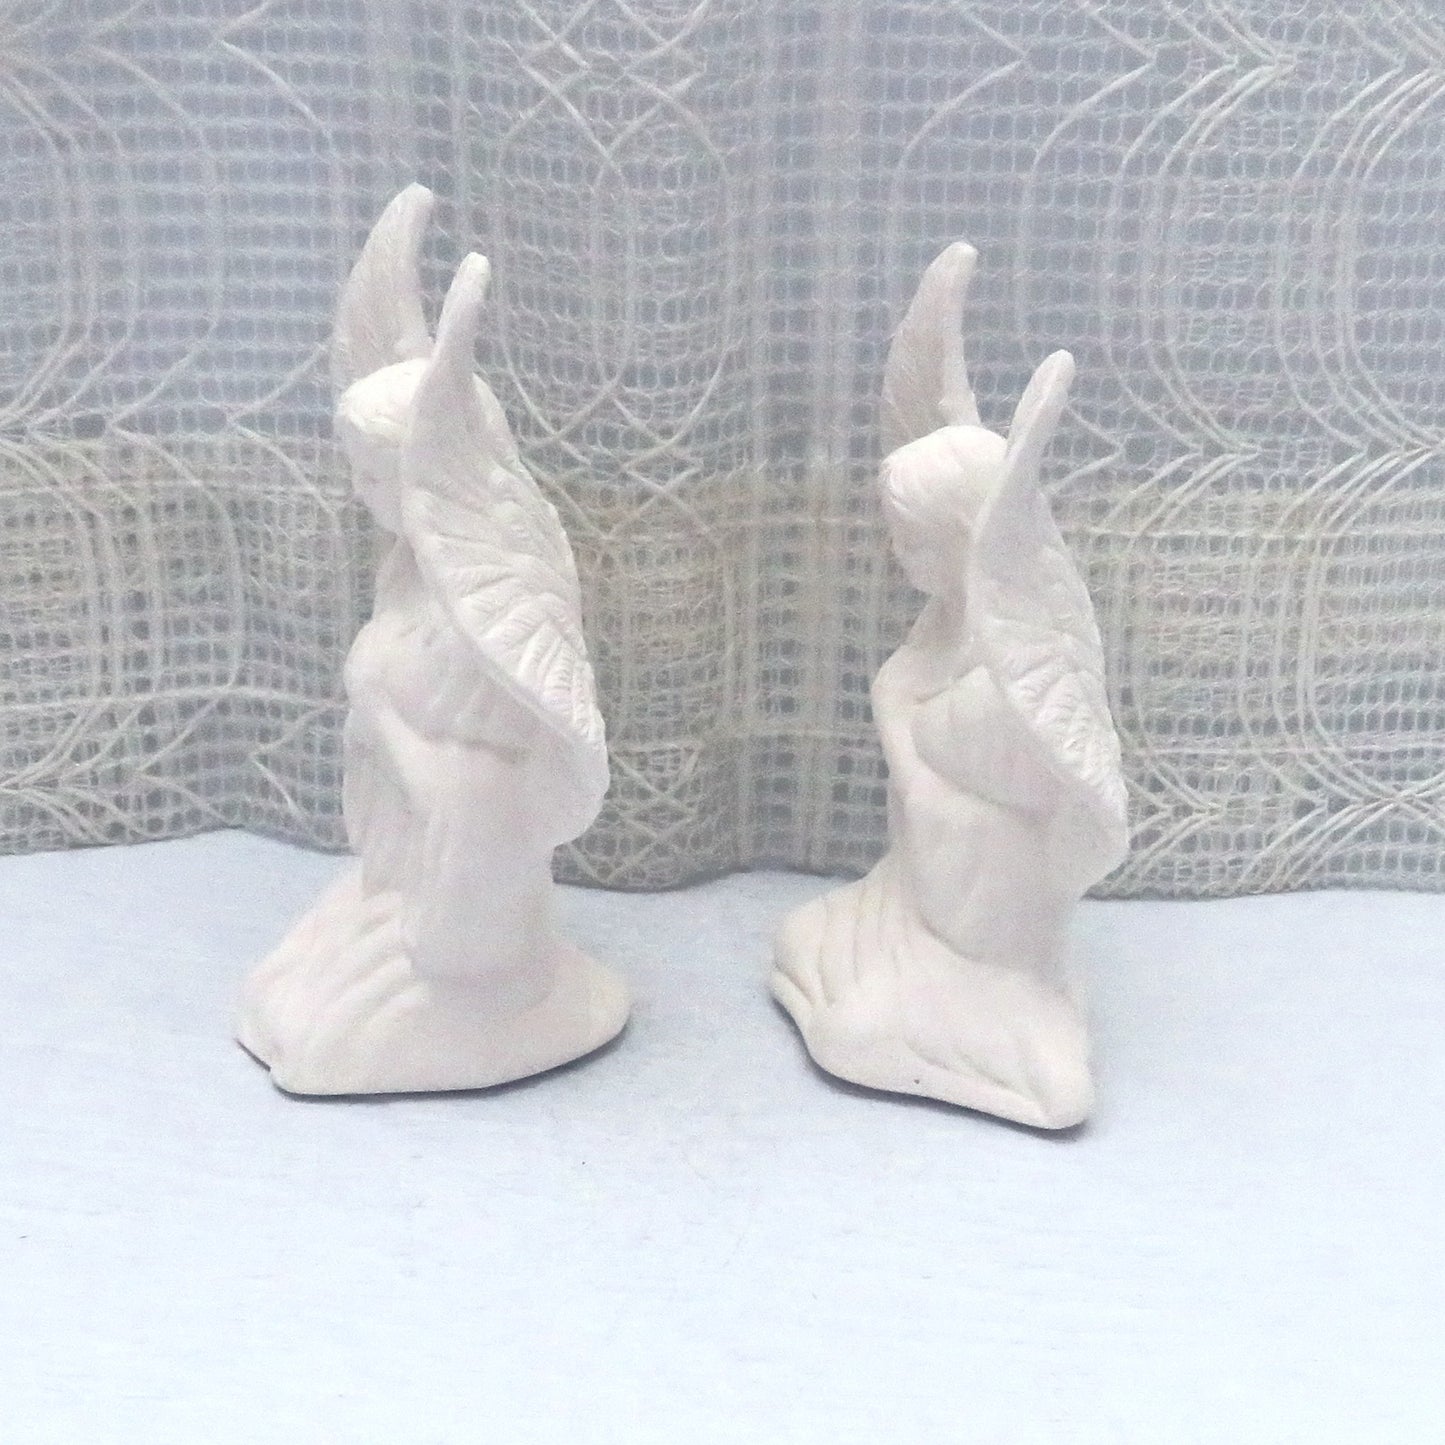 Handmade paintable ceramic angel statuettes facing to the left.